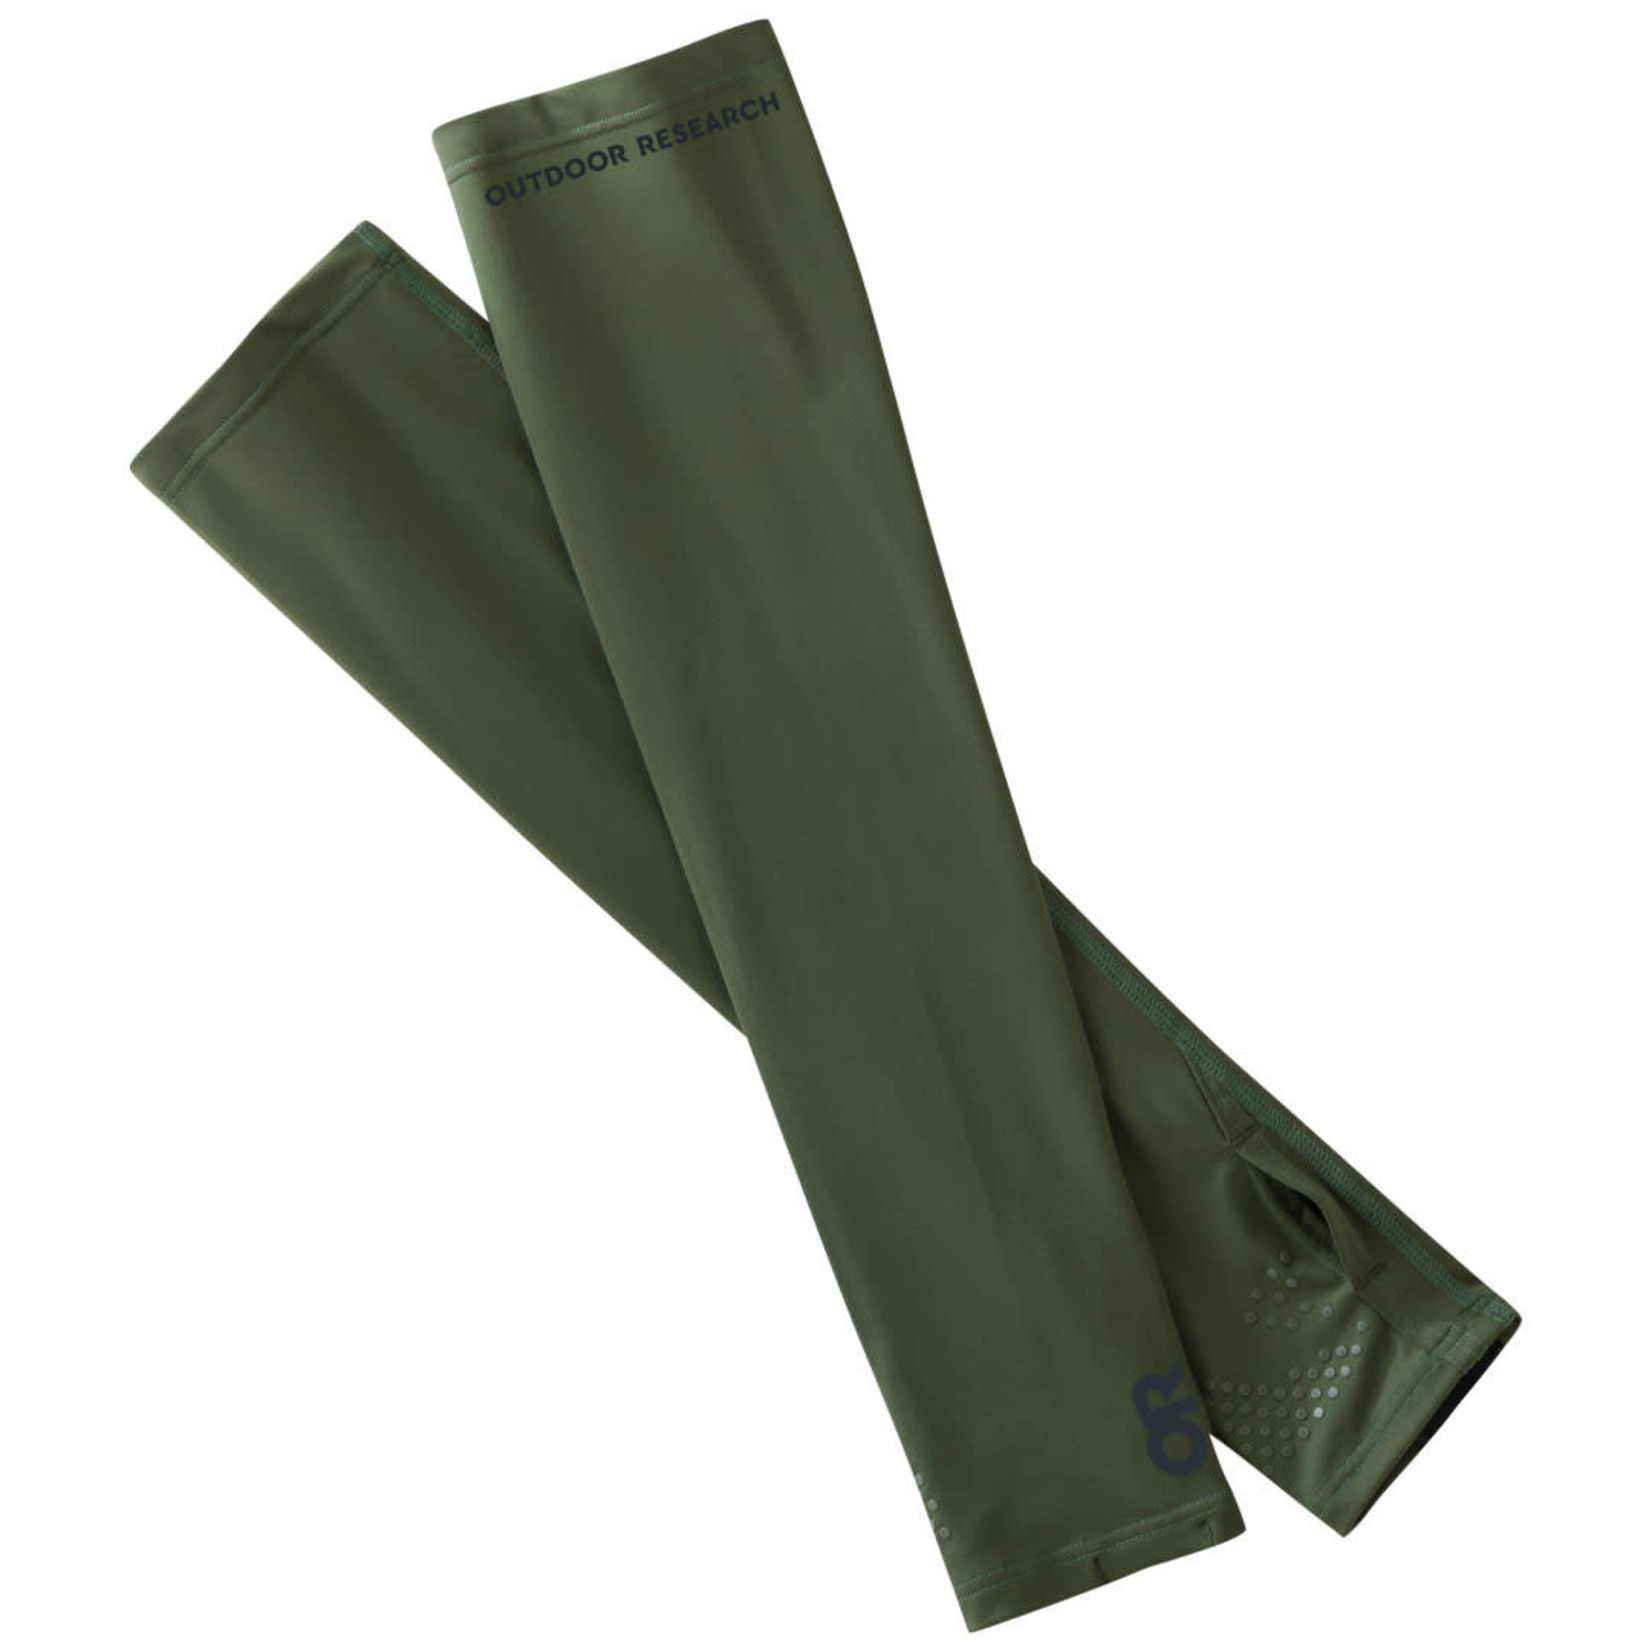 Outdoor Research ActiveIce Sun Sleeves 250148